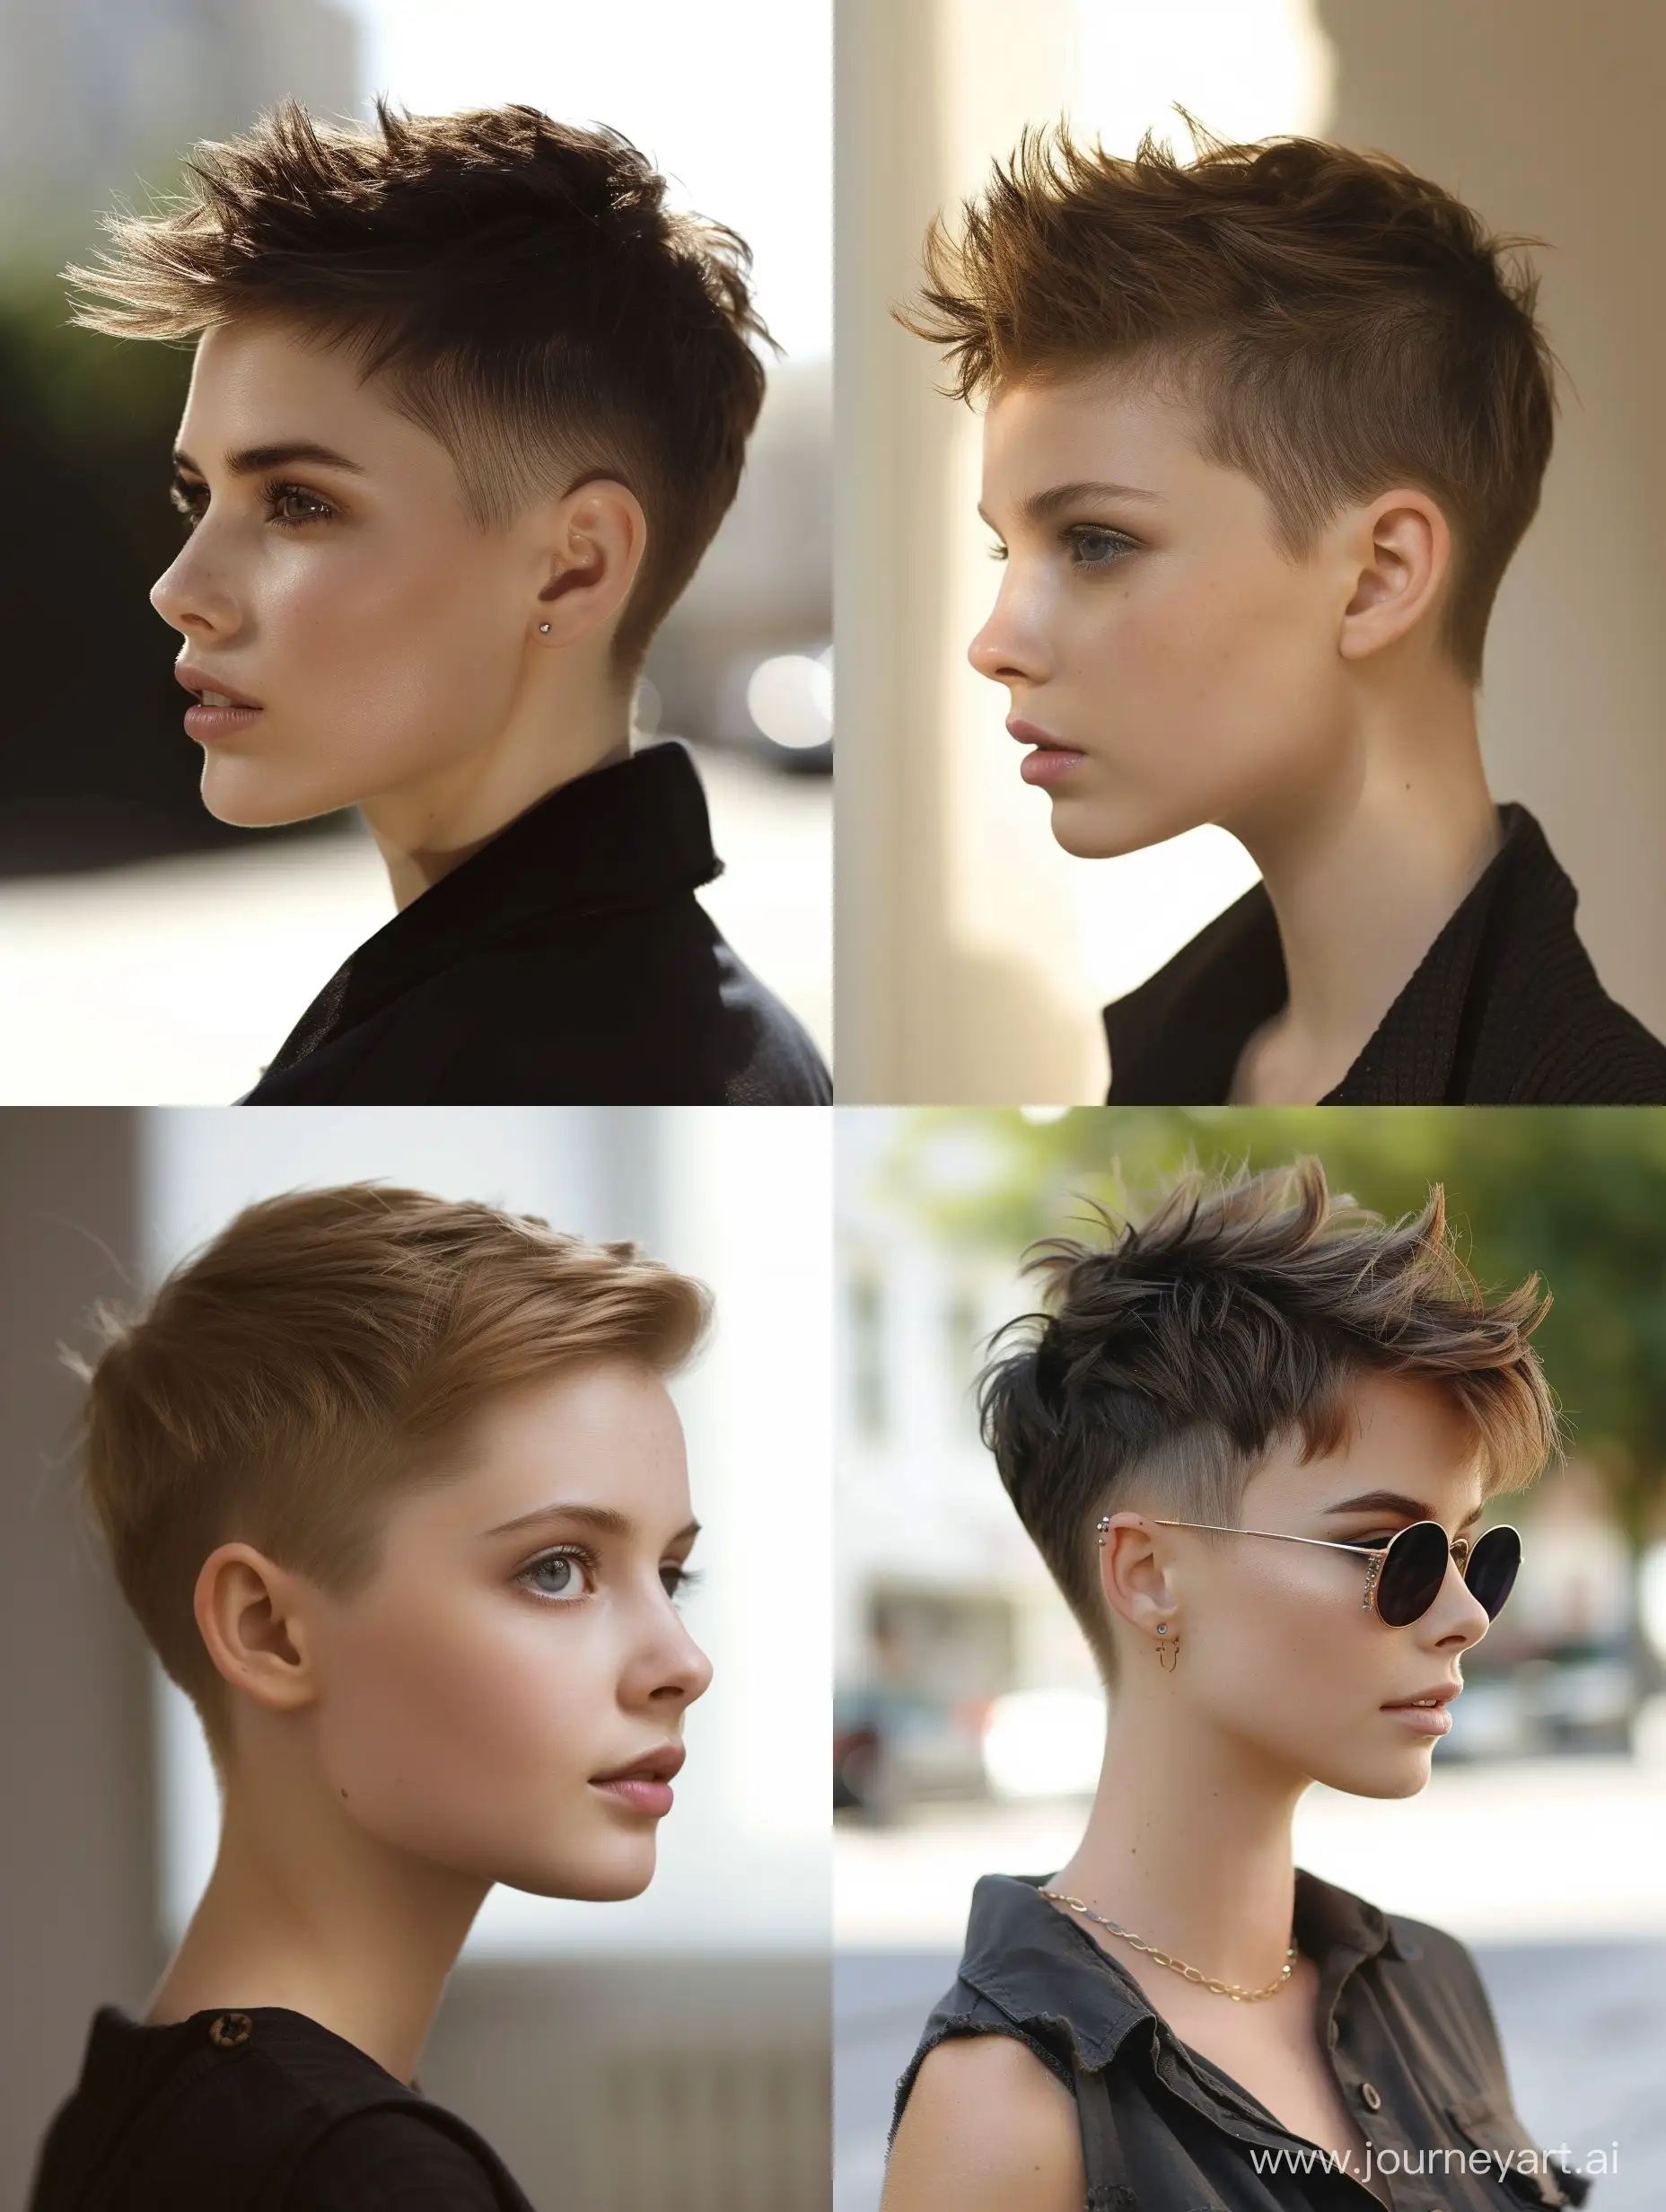 Edgy-Pixie-Haircut-with-Shaved-Sides